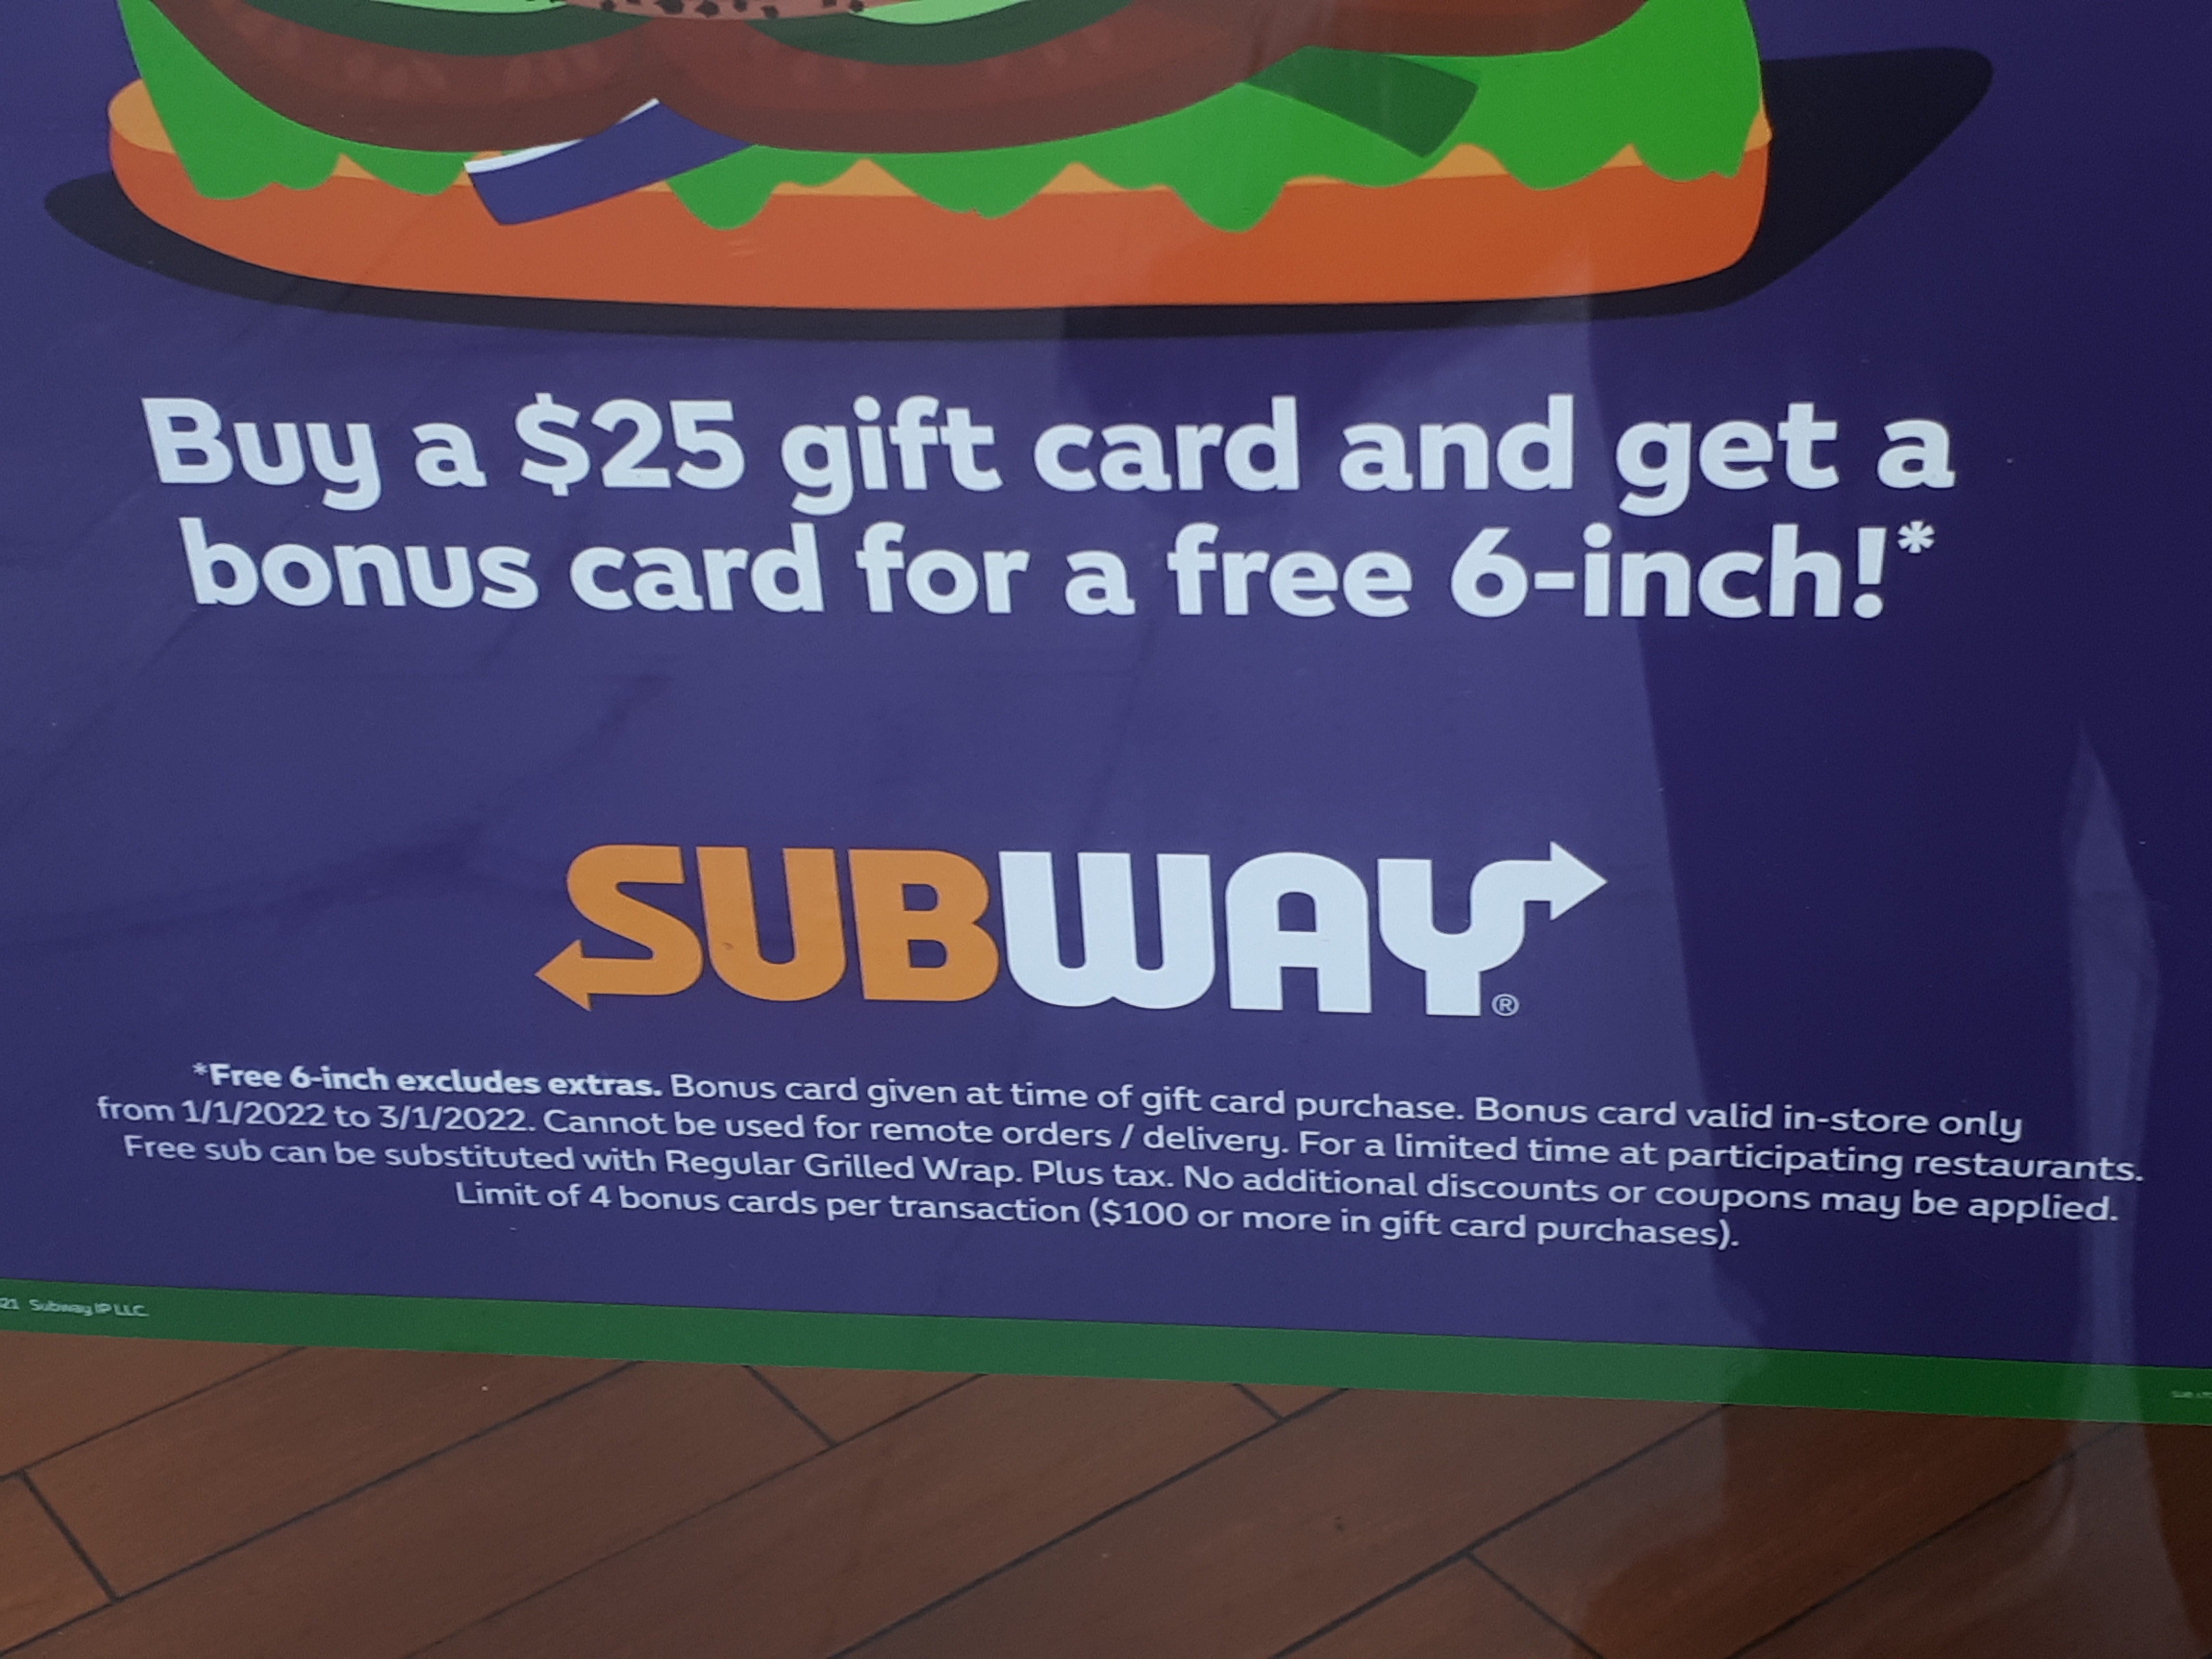 Coupons that are good until 6/25 : r/subway